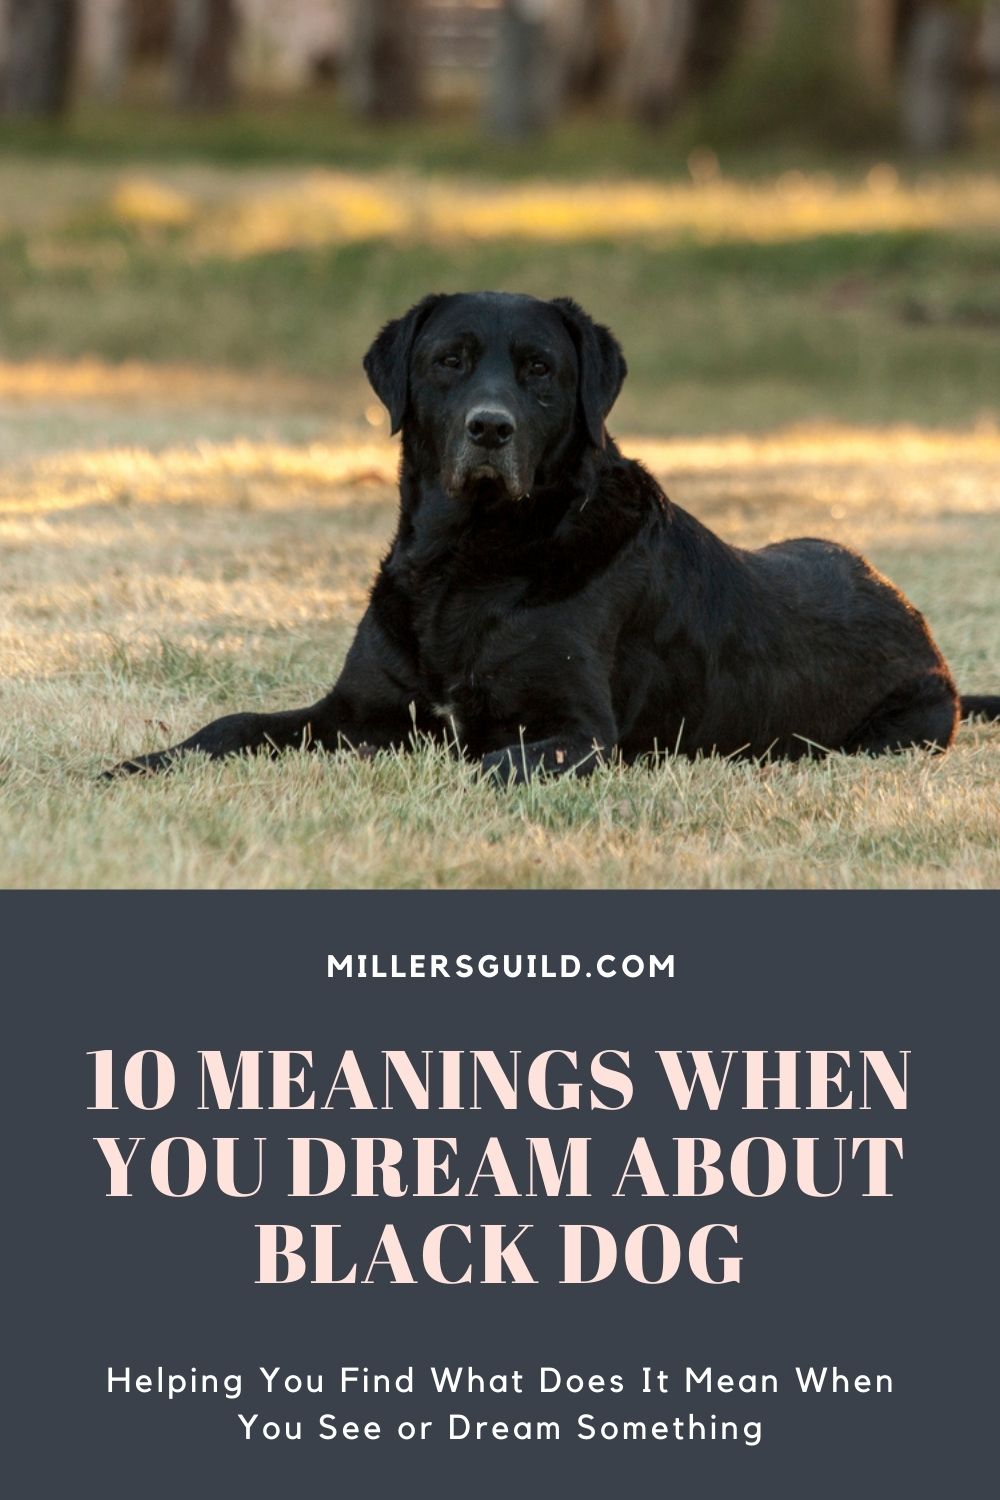 10 Meanings When You Dream about Black Dog